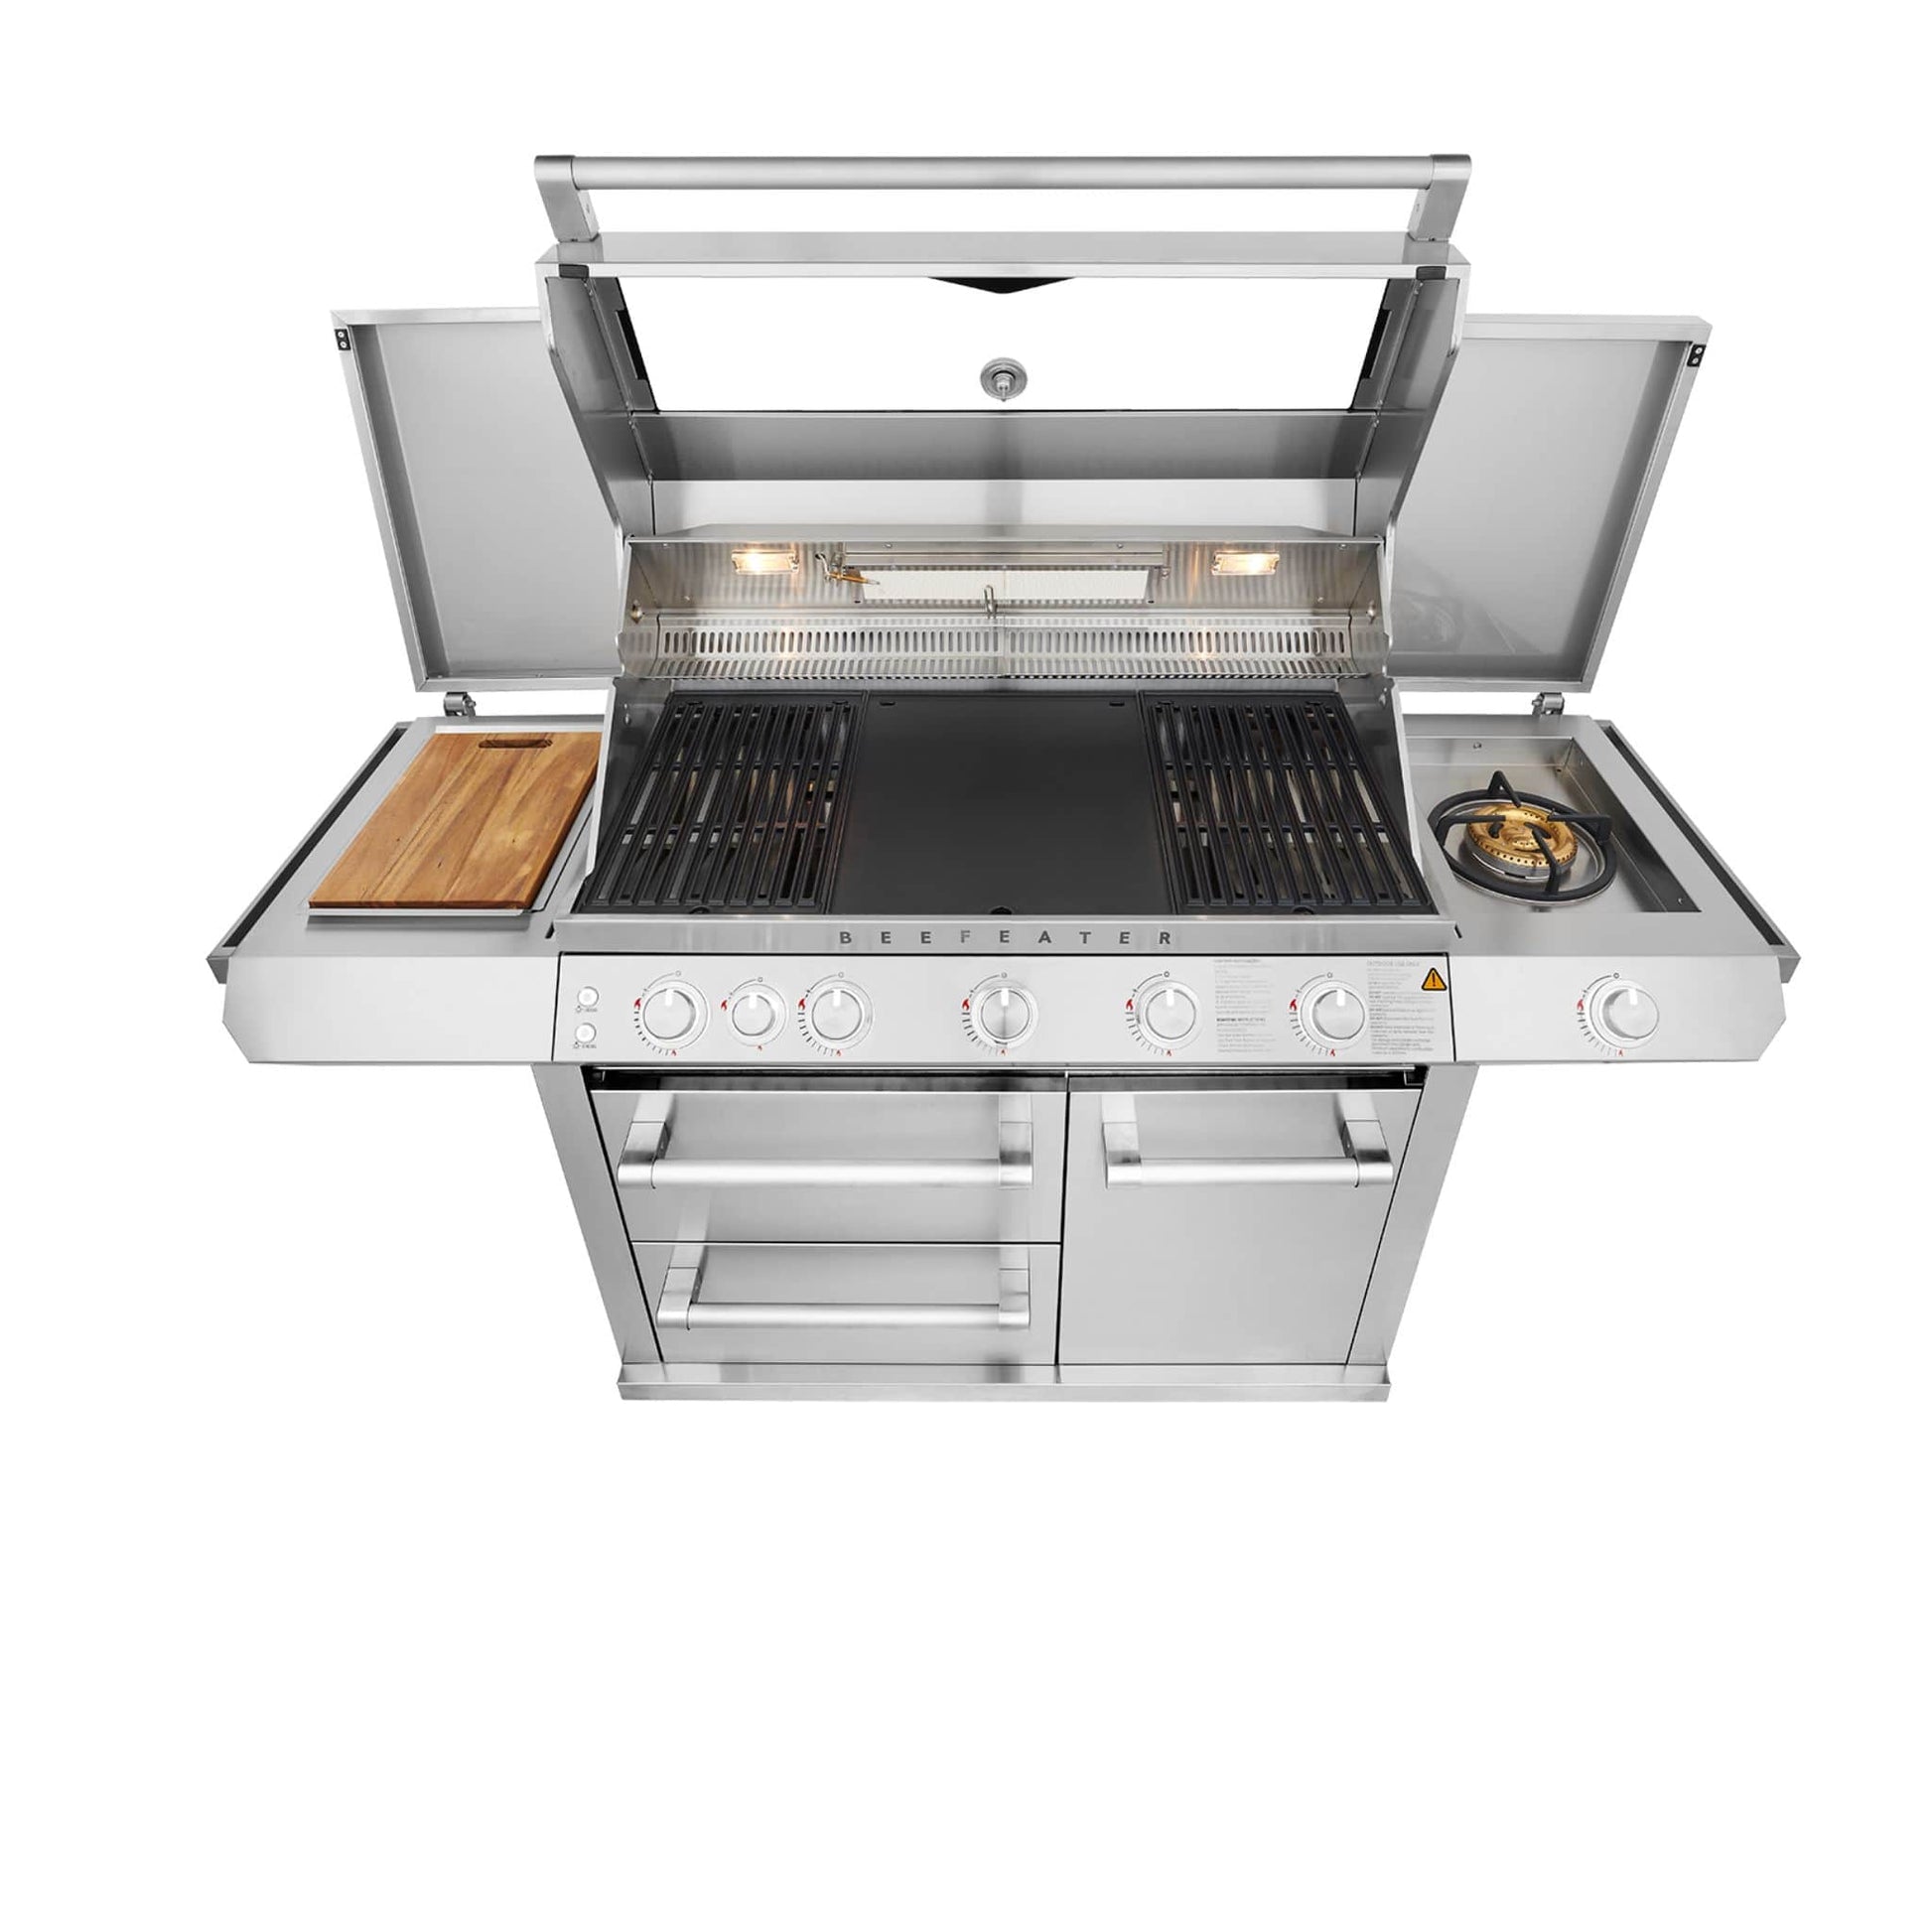 BeefEater Barbecue 7000 Series Premium - 5 Burner with Side Burner & Trolley